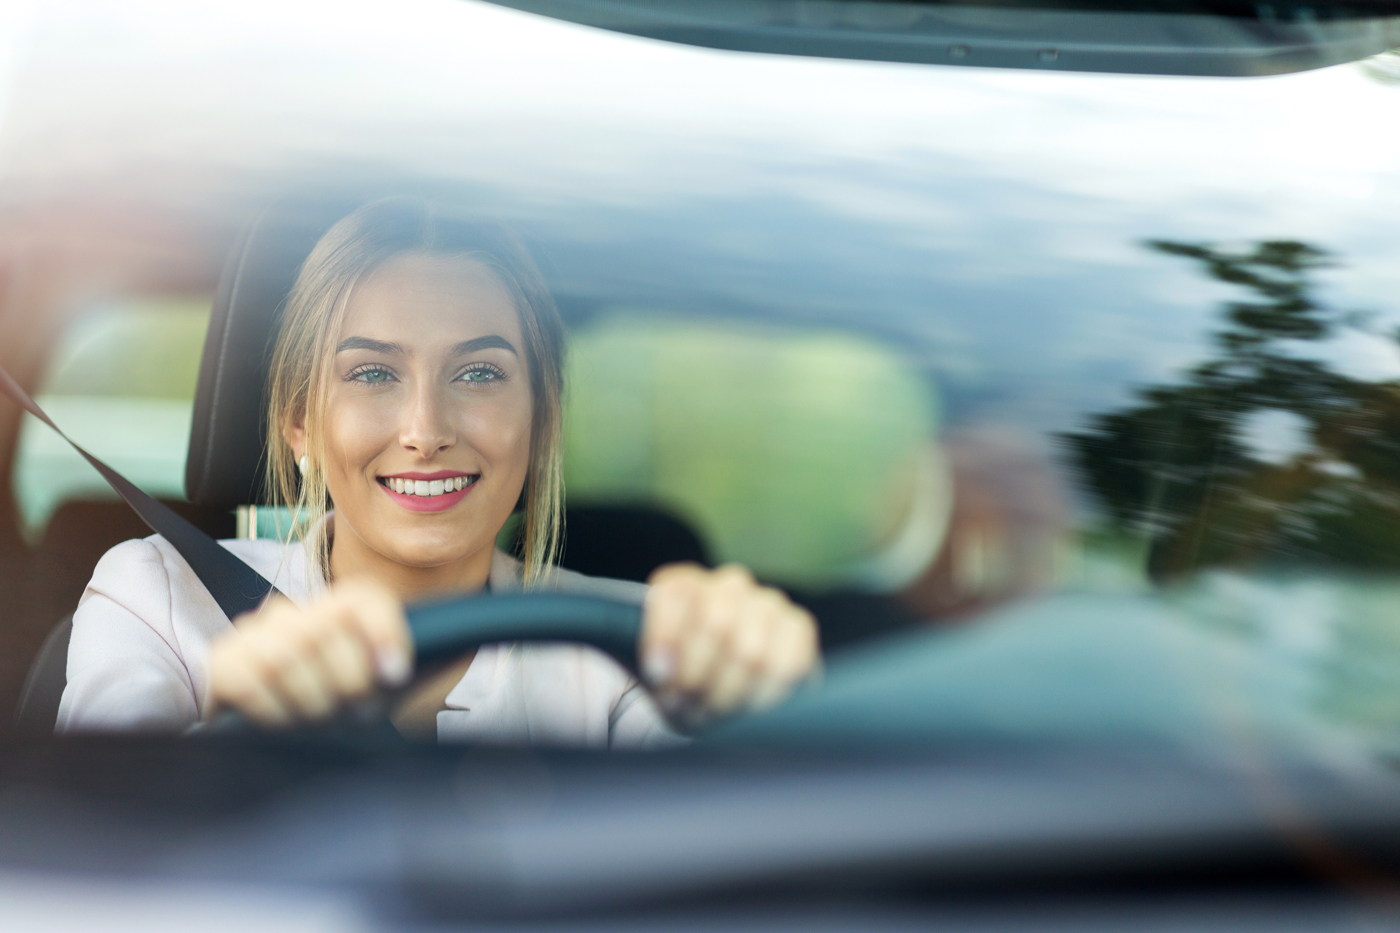 A young woman driving a car smiling